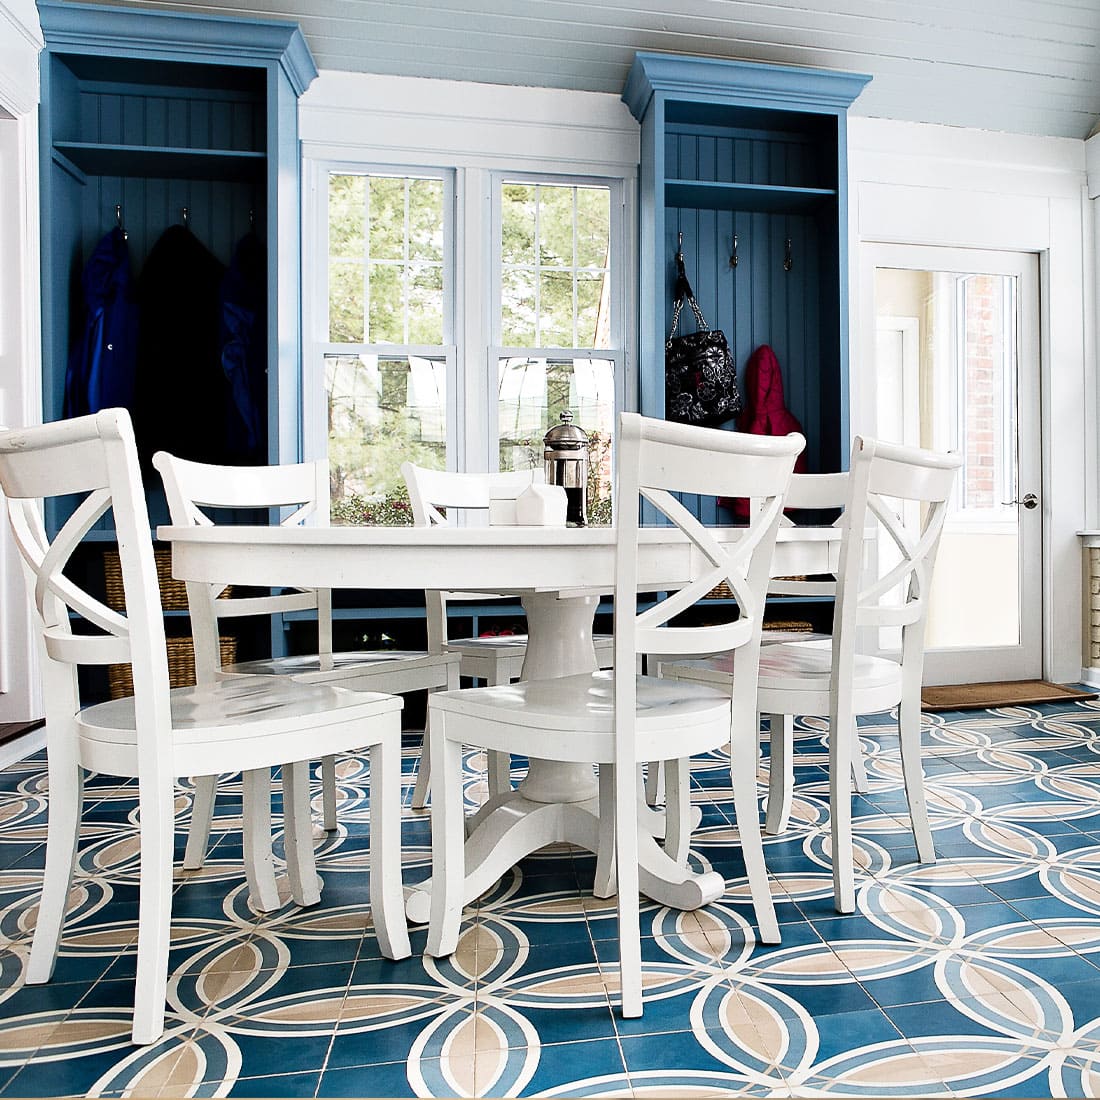 White table set contrast blue and yellow pattern tile in sunroom